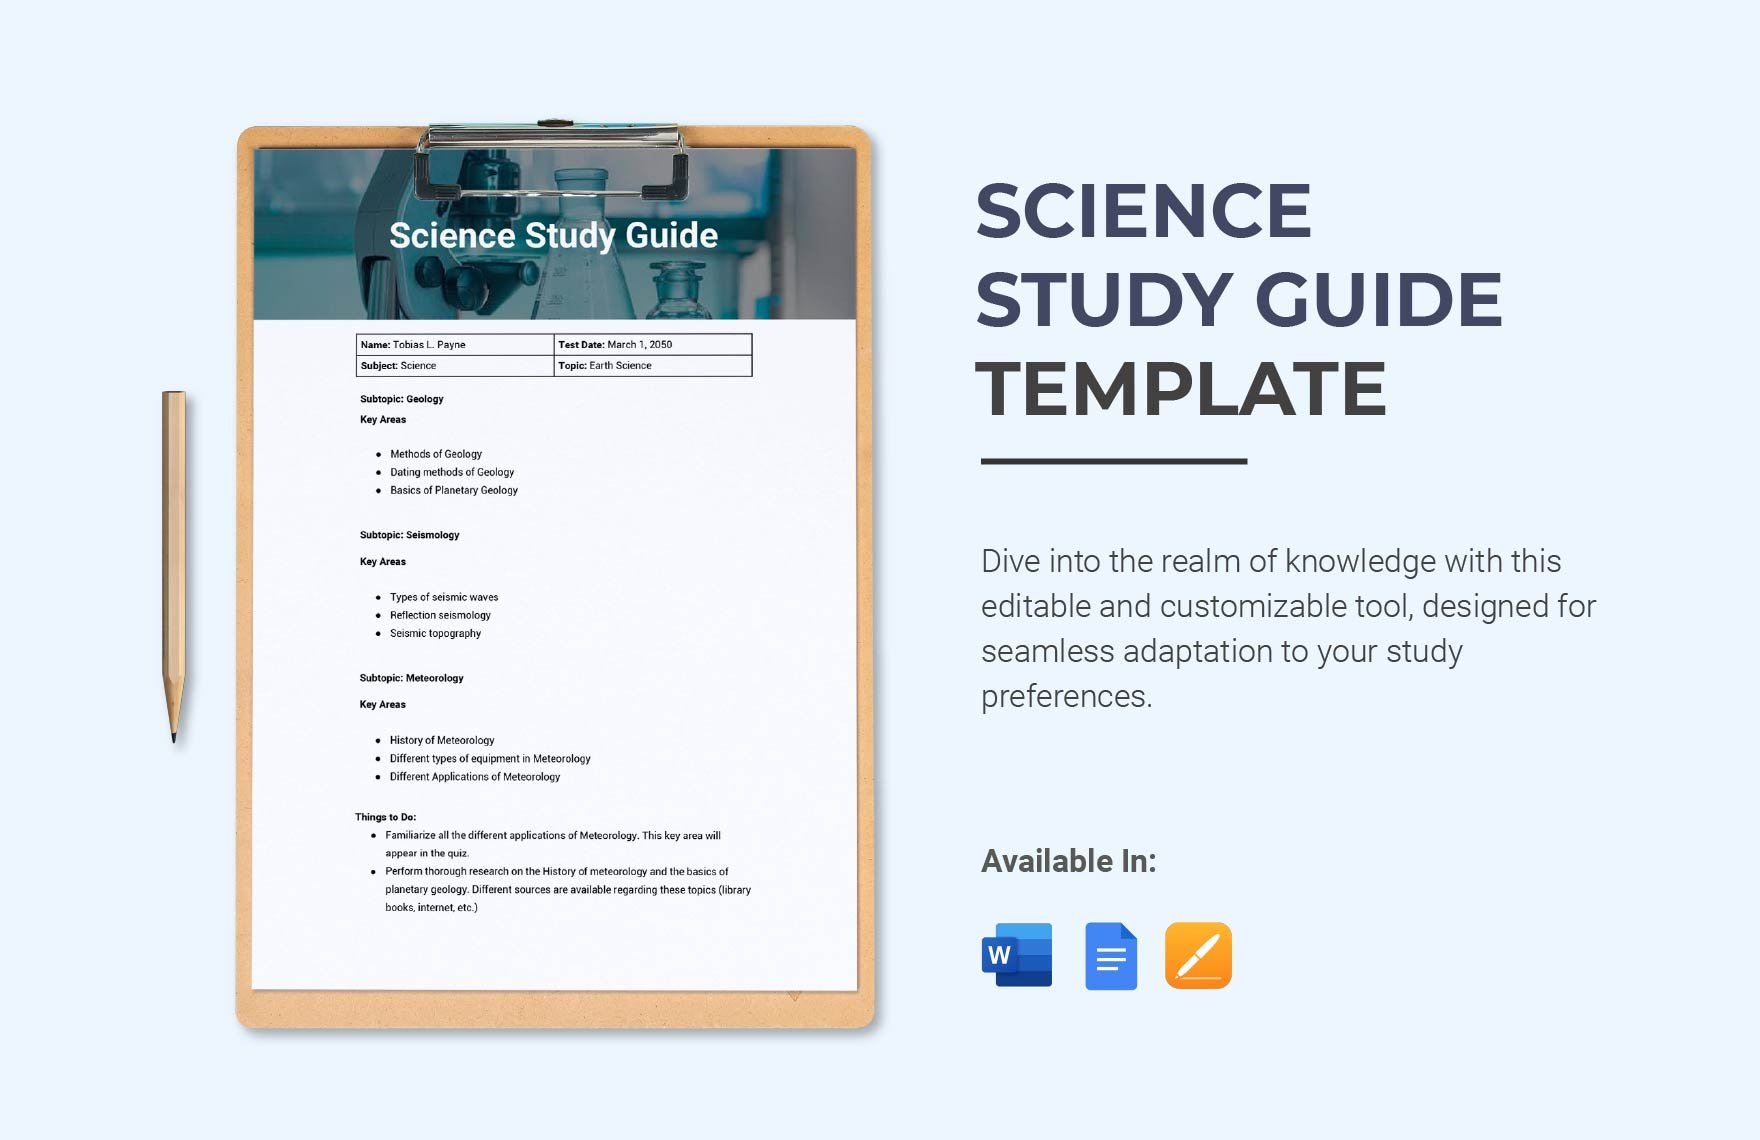 Science Study Guide Template